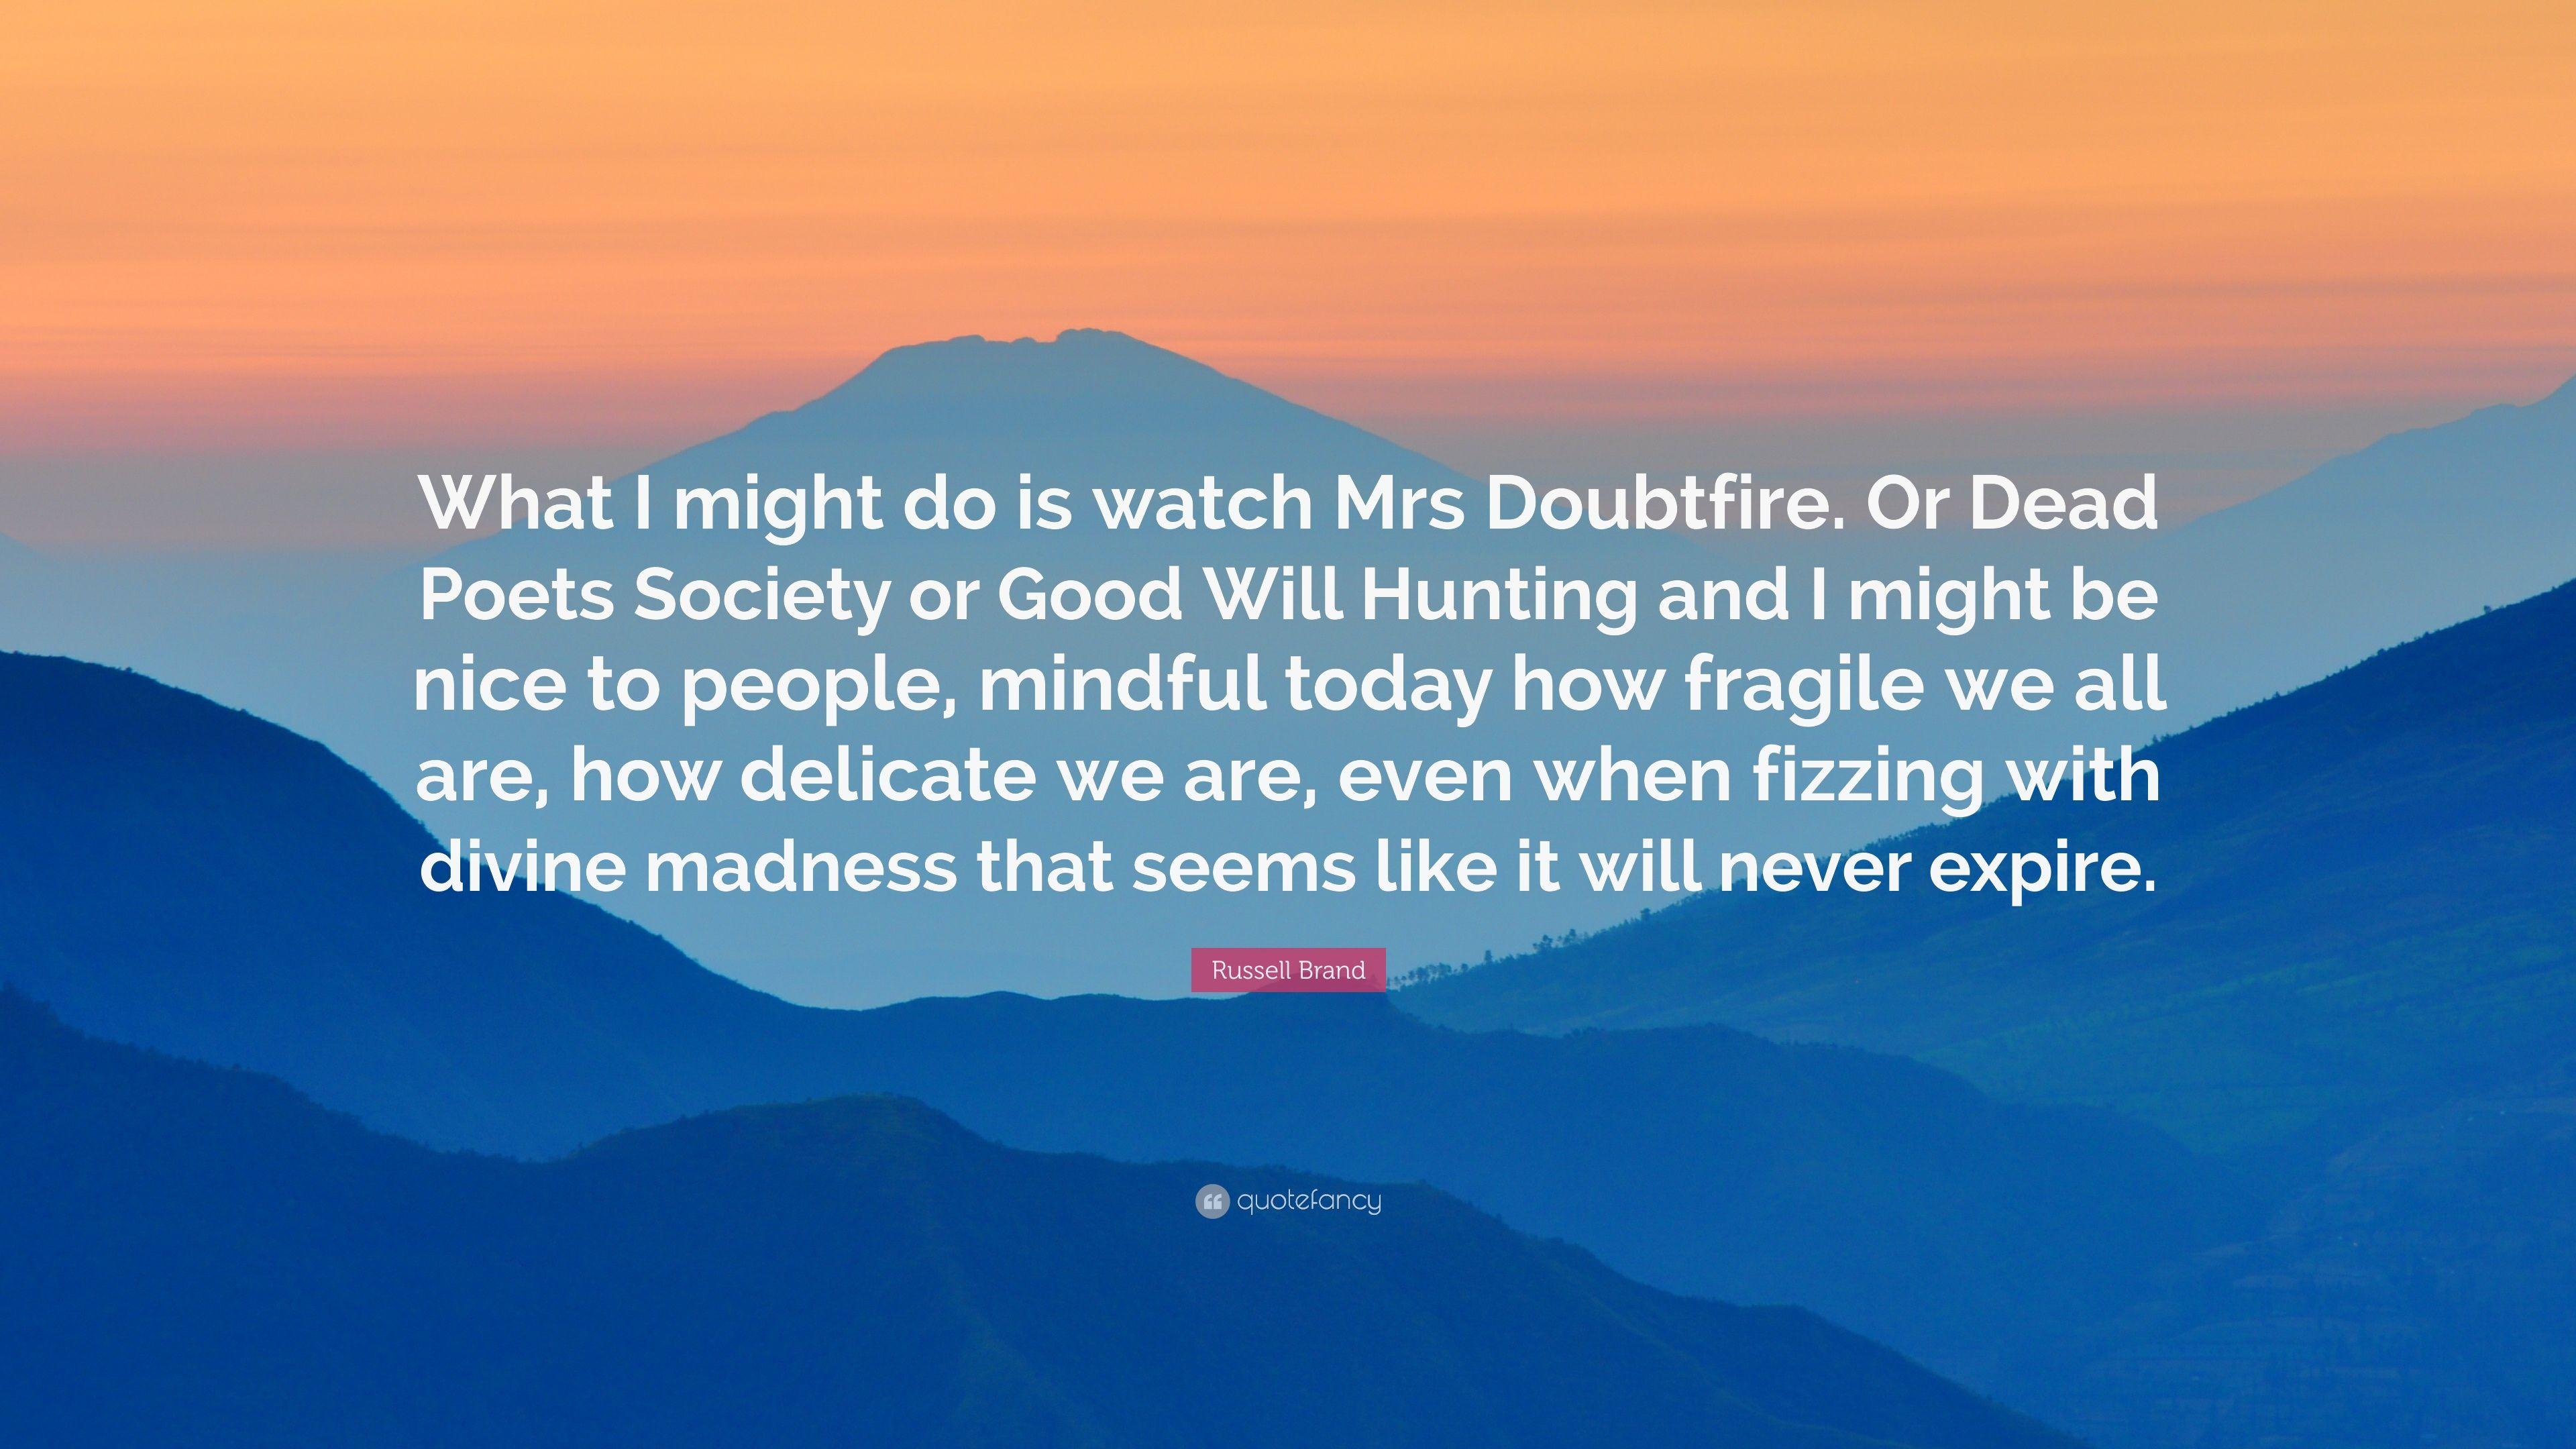 Russell Brand Quote: “What I might do is watch Mrs Doubtfire. Or